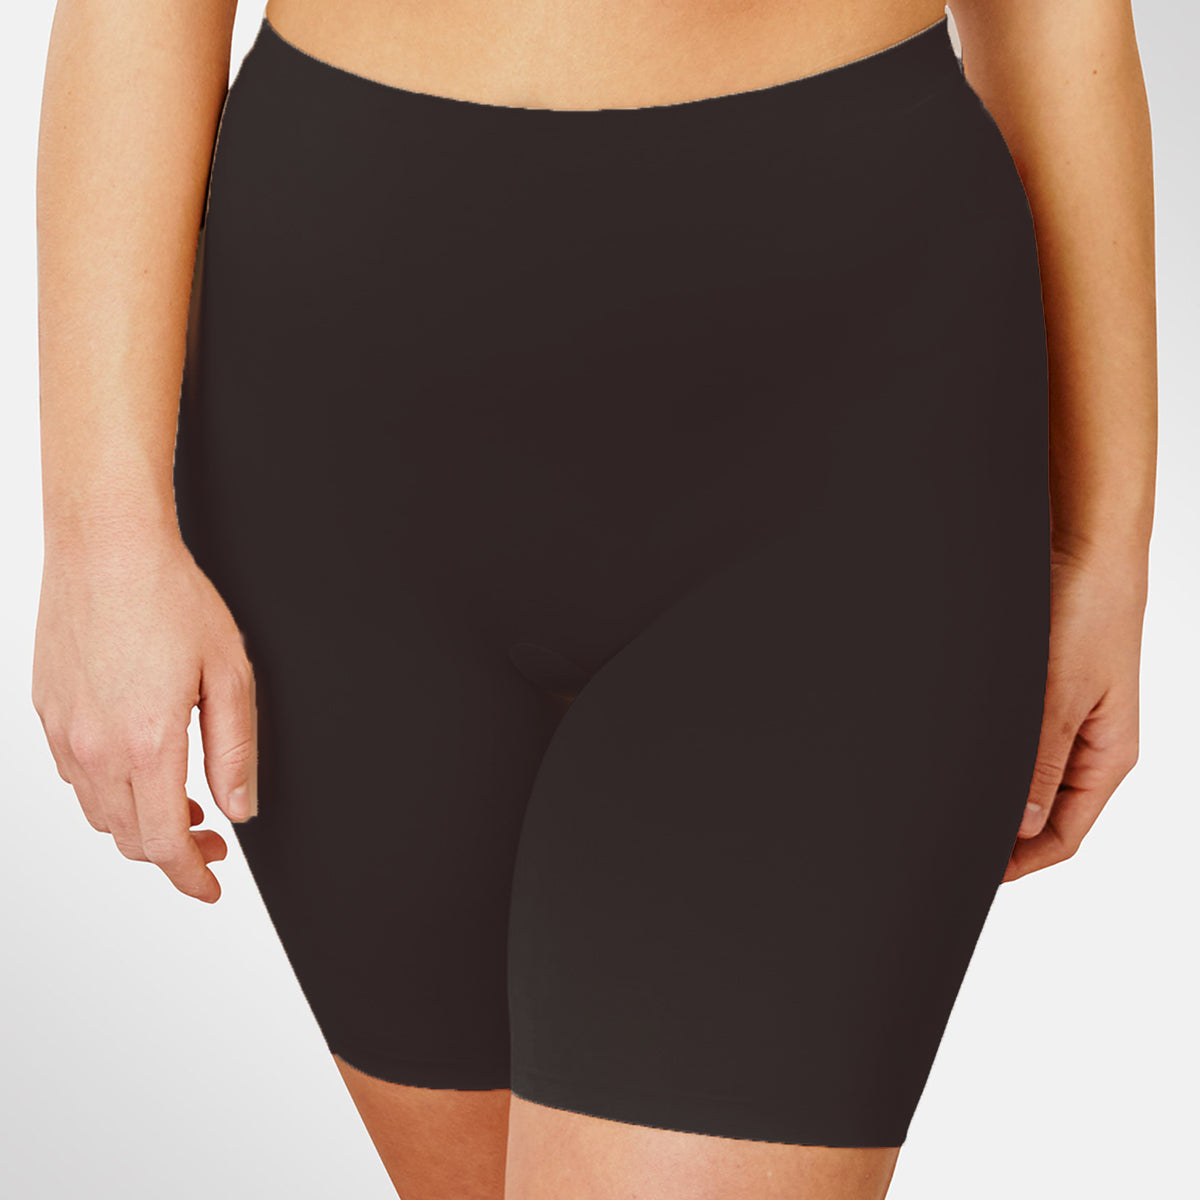 Maidenform Flexees Smoothing Thigh Slimmer - Cool Comfort